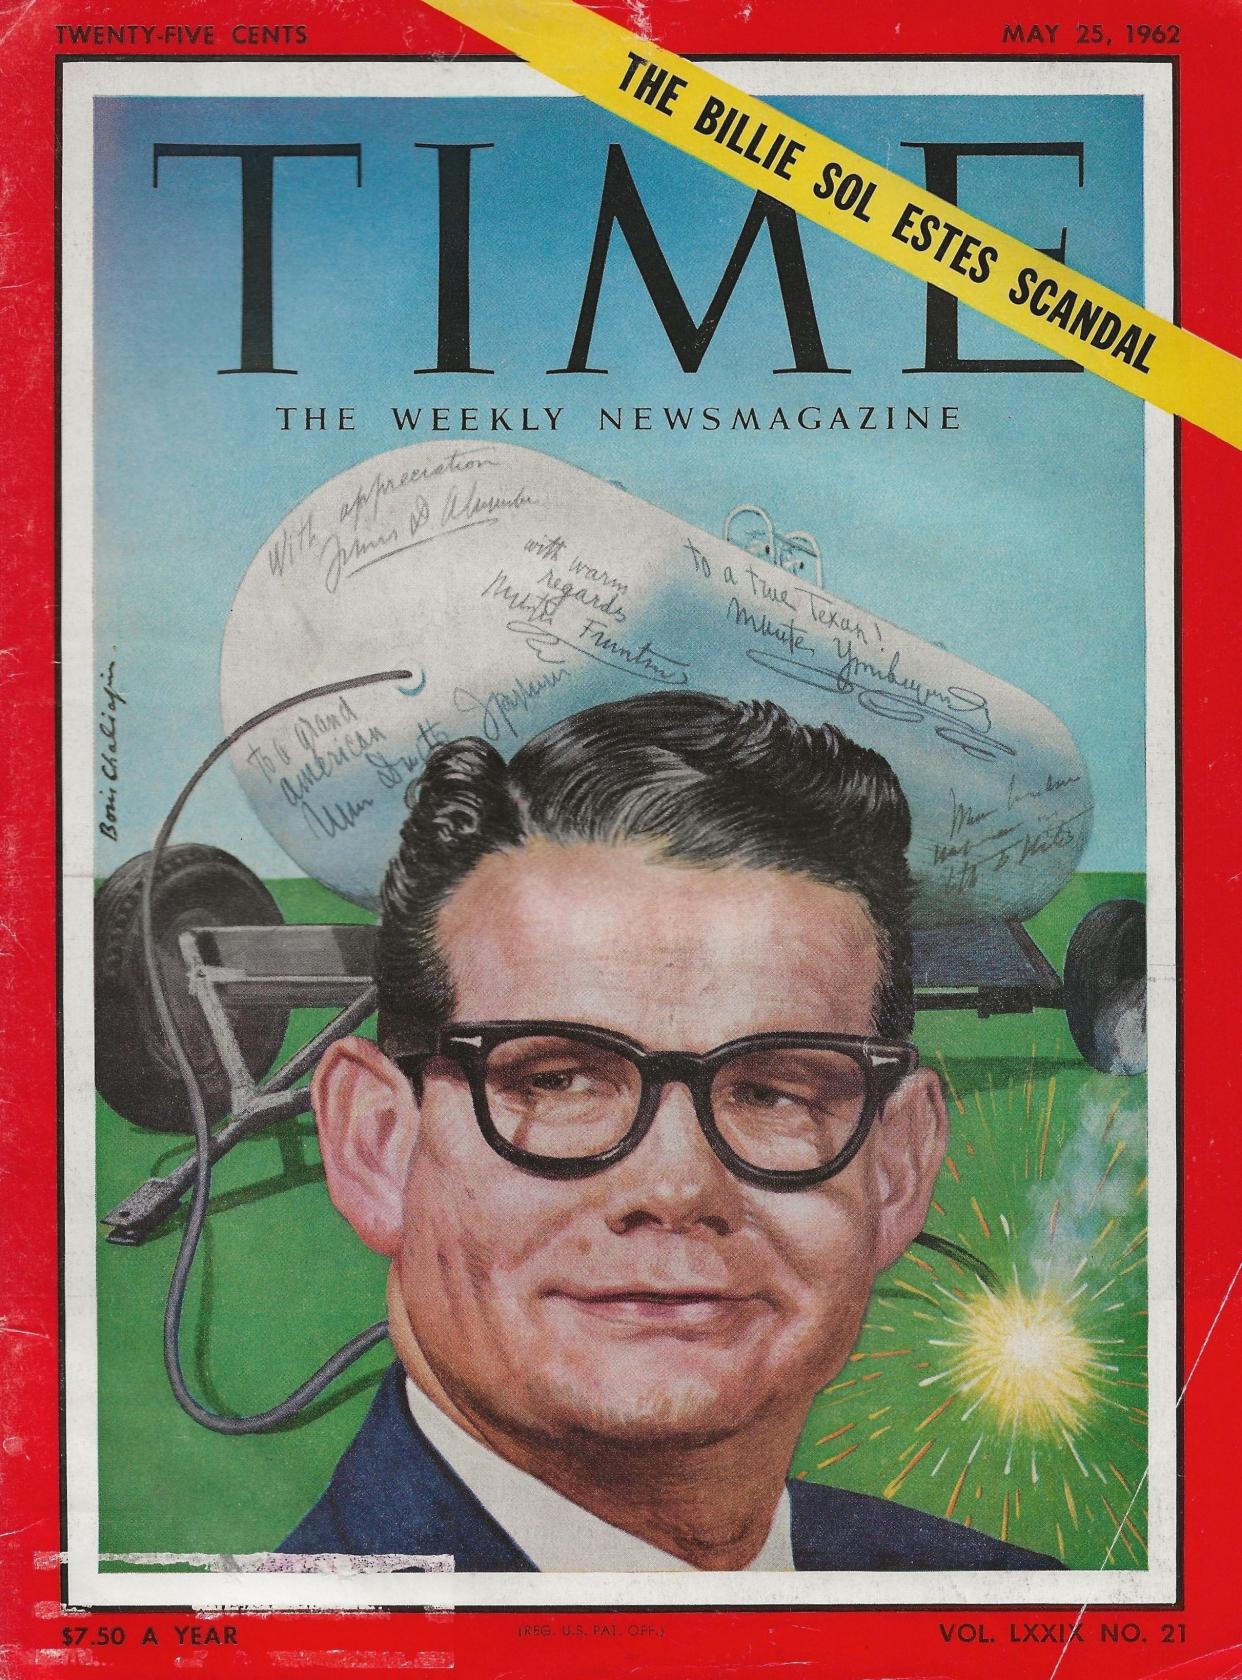 Time magazine cover featuring Billie Sol Estes, May 25, 1962